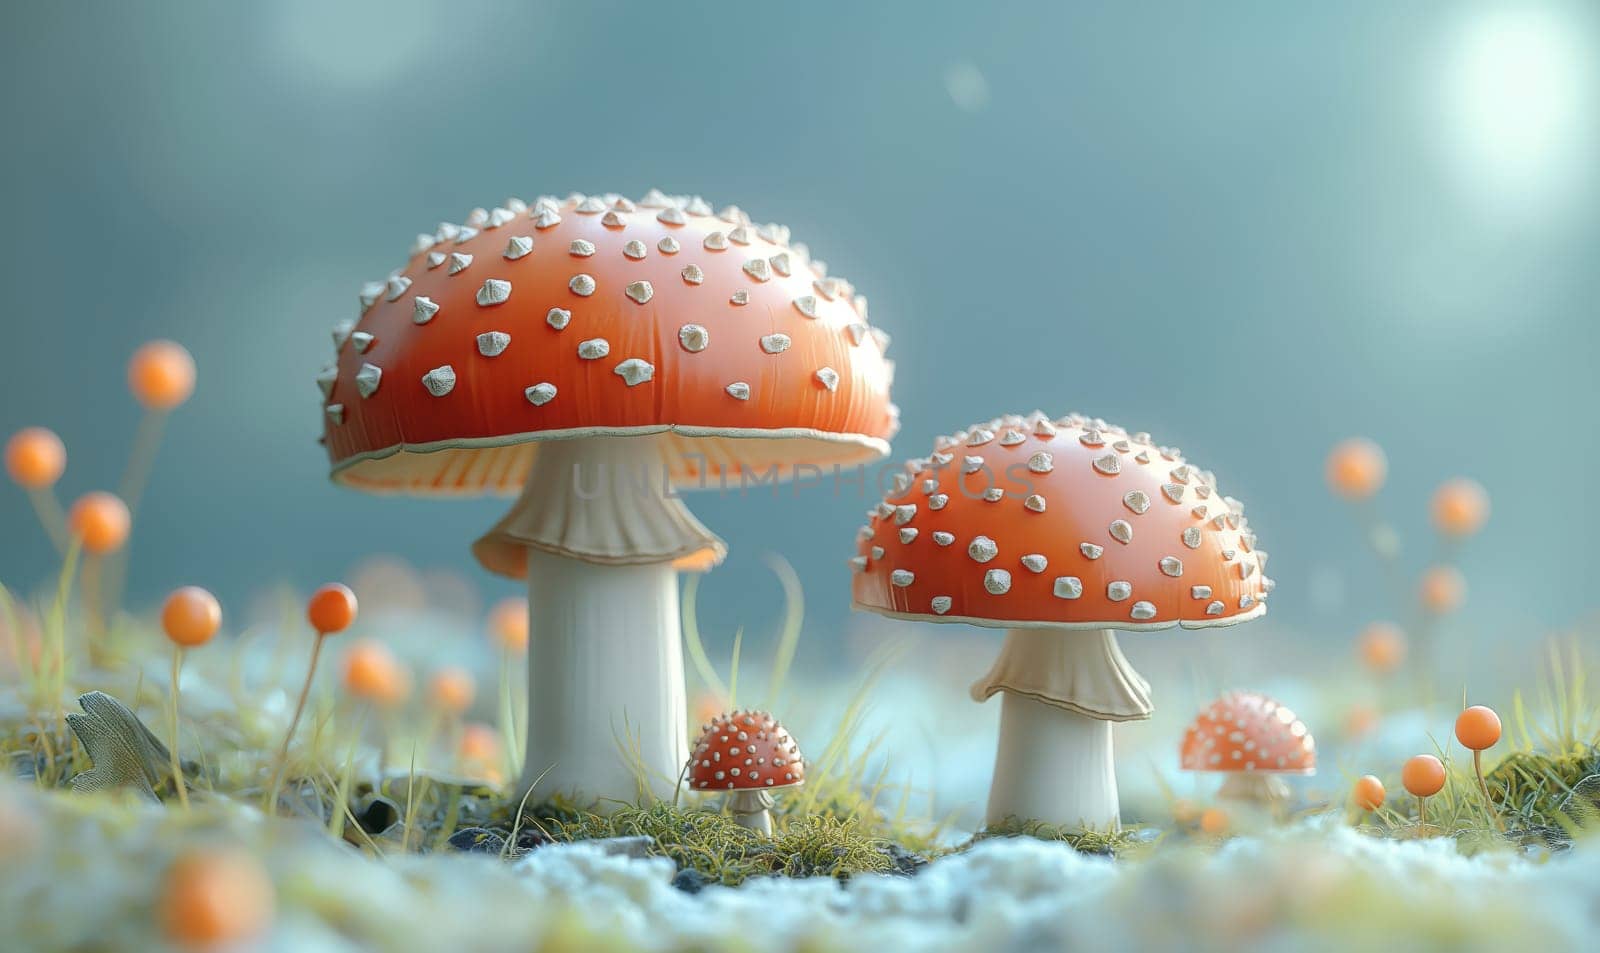 Illustration, fly agaric mushrooms in a clearing. by Fischeron